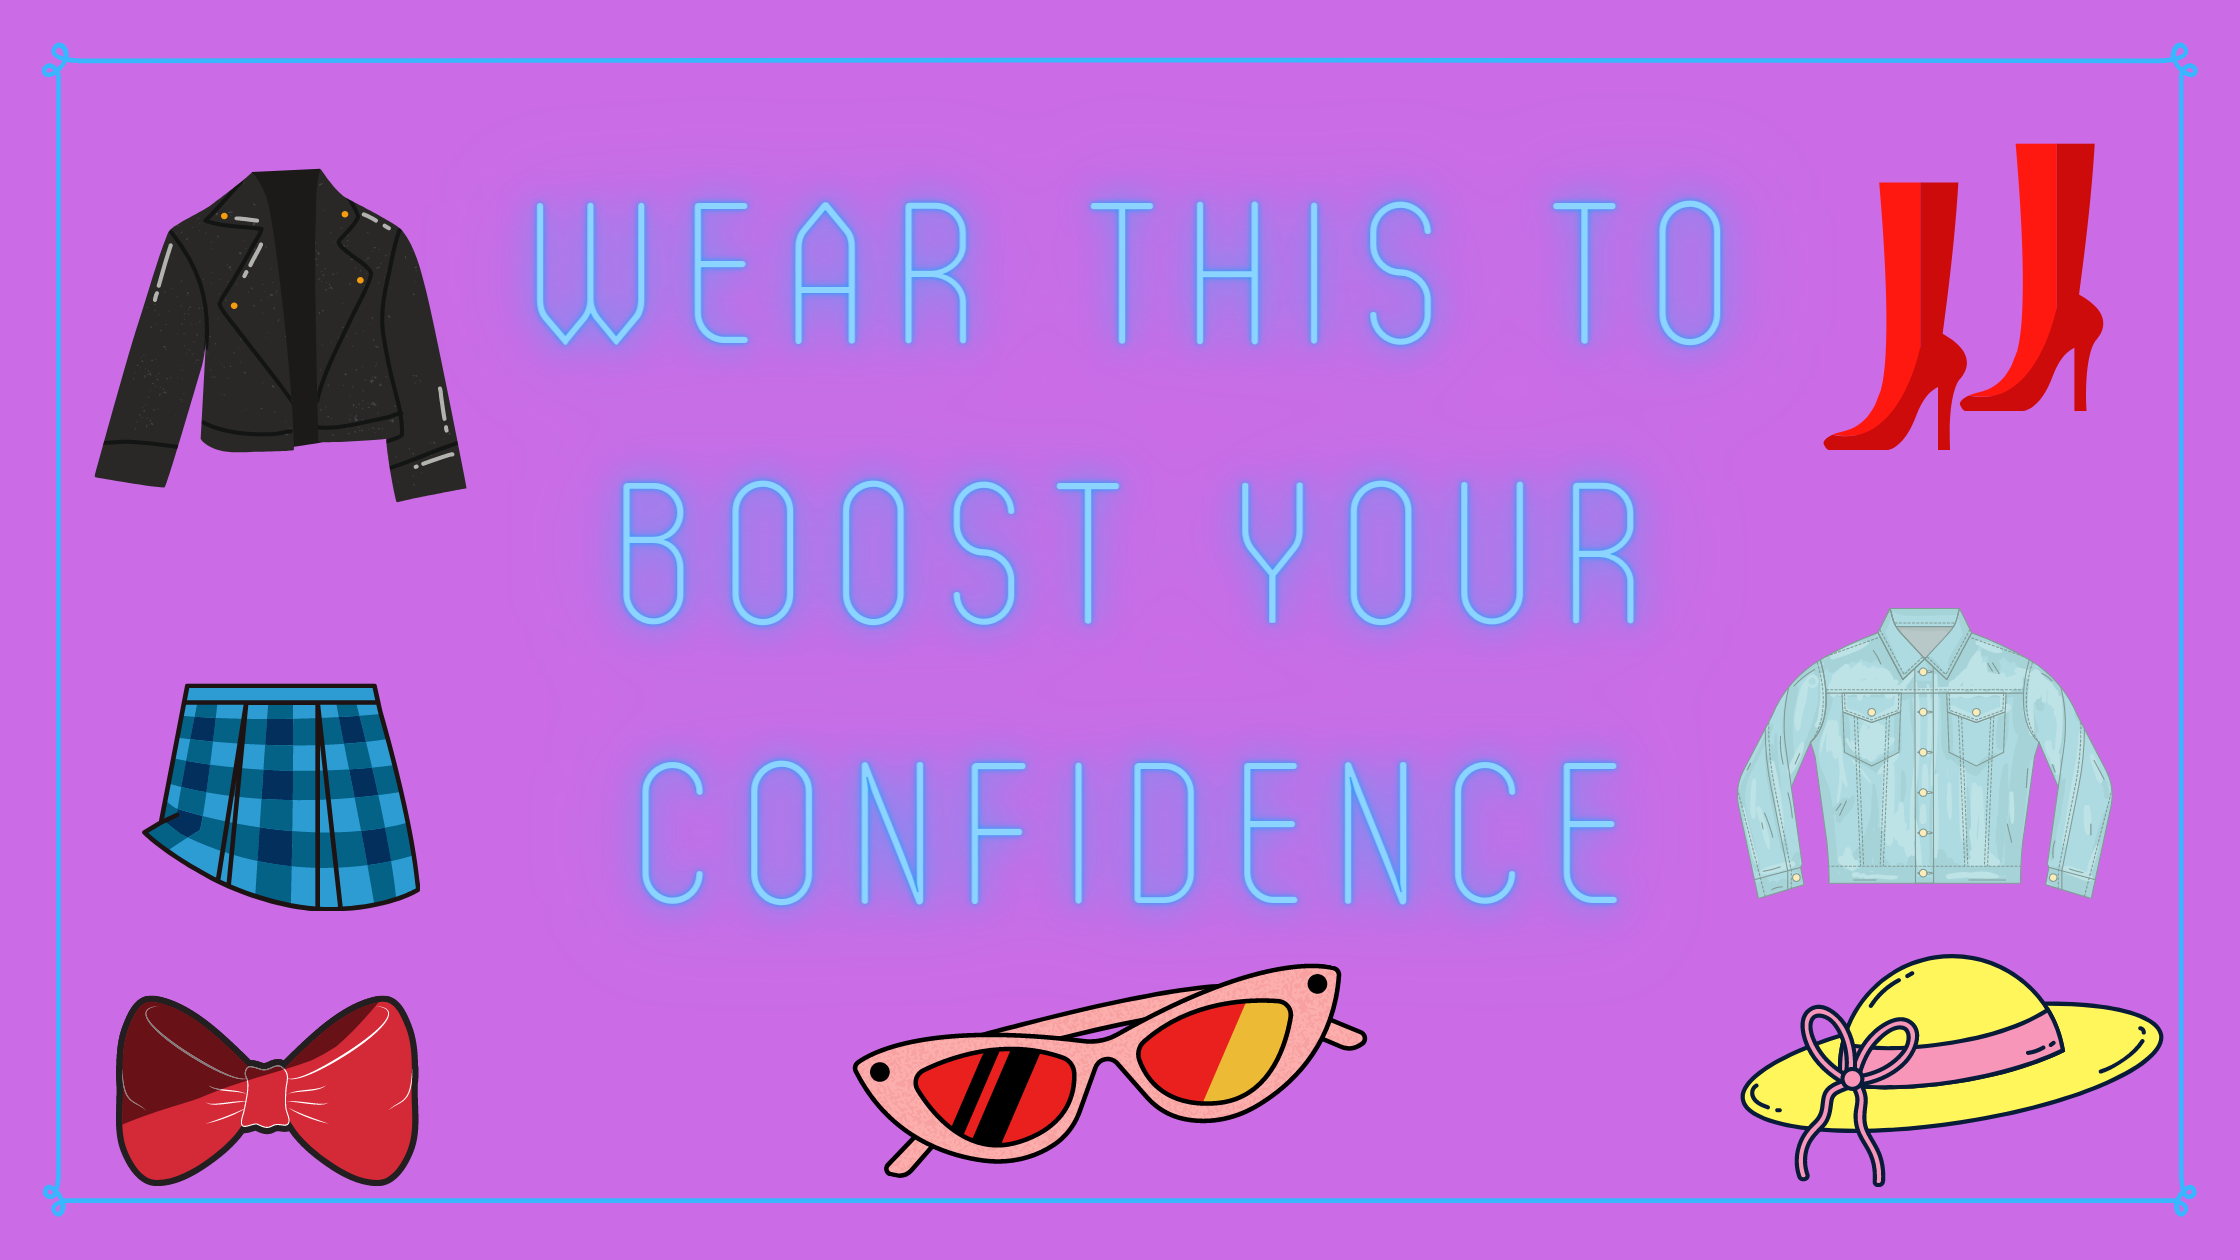 Wear this to boost your confidence